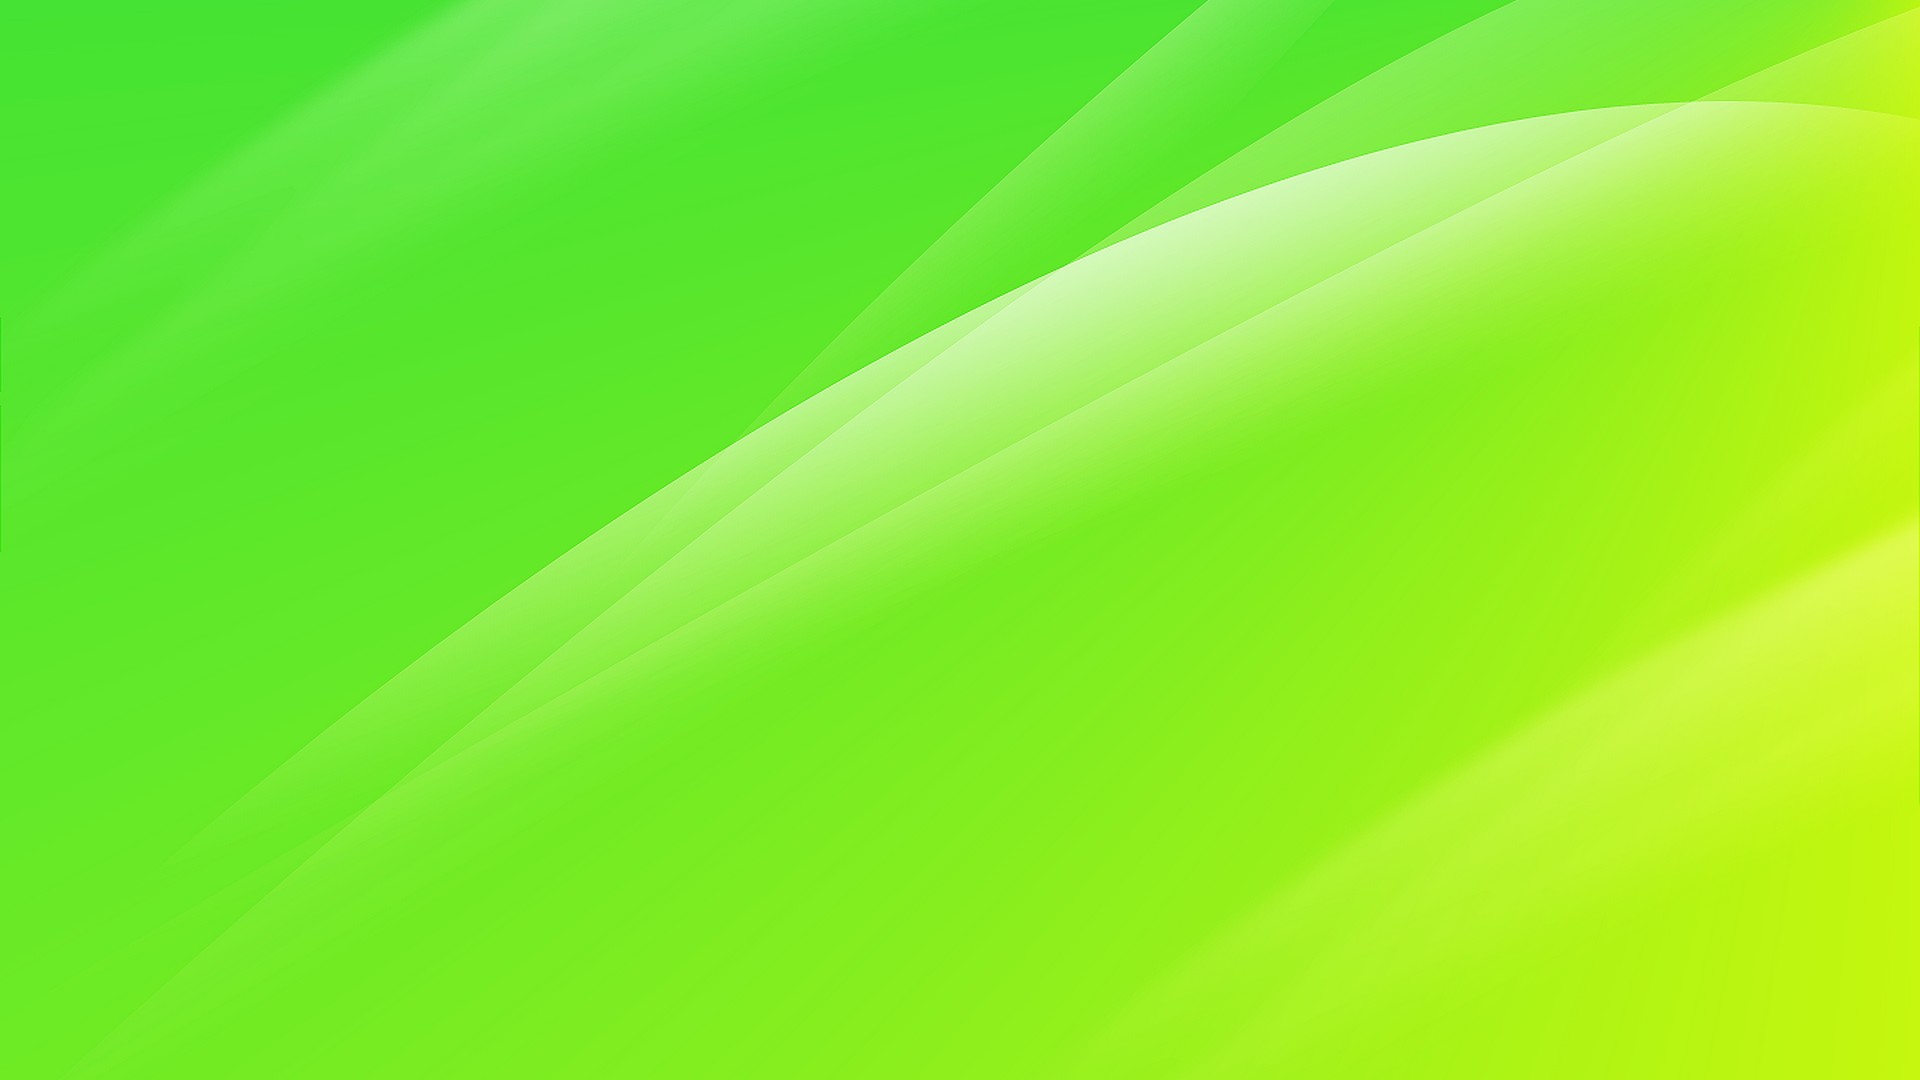 Best Lime Green Wallpaper with image resolution 1920x1080 pixel. You can use this wallpaper as background for your desktop Computer Screensavers, Android or iPhone smartphones